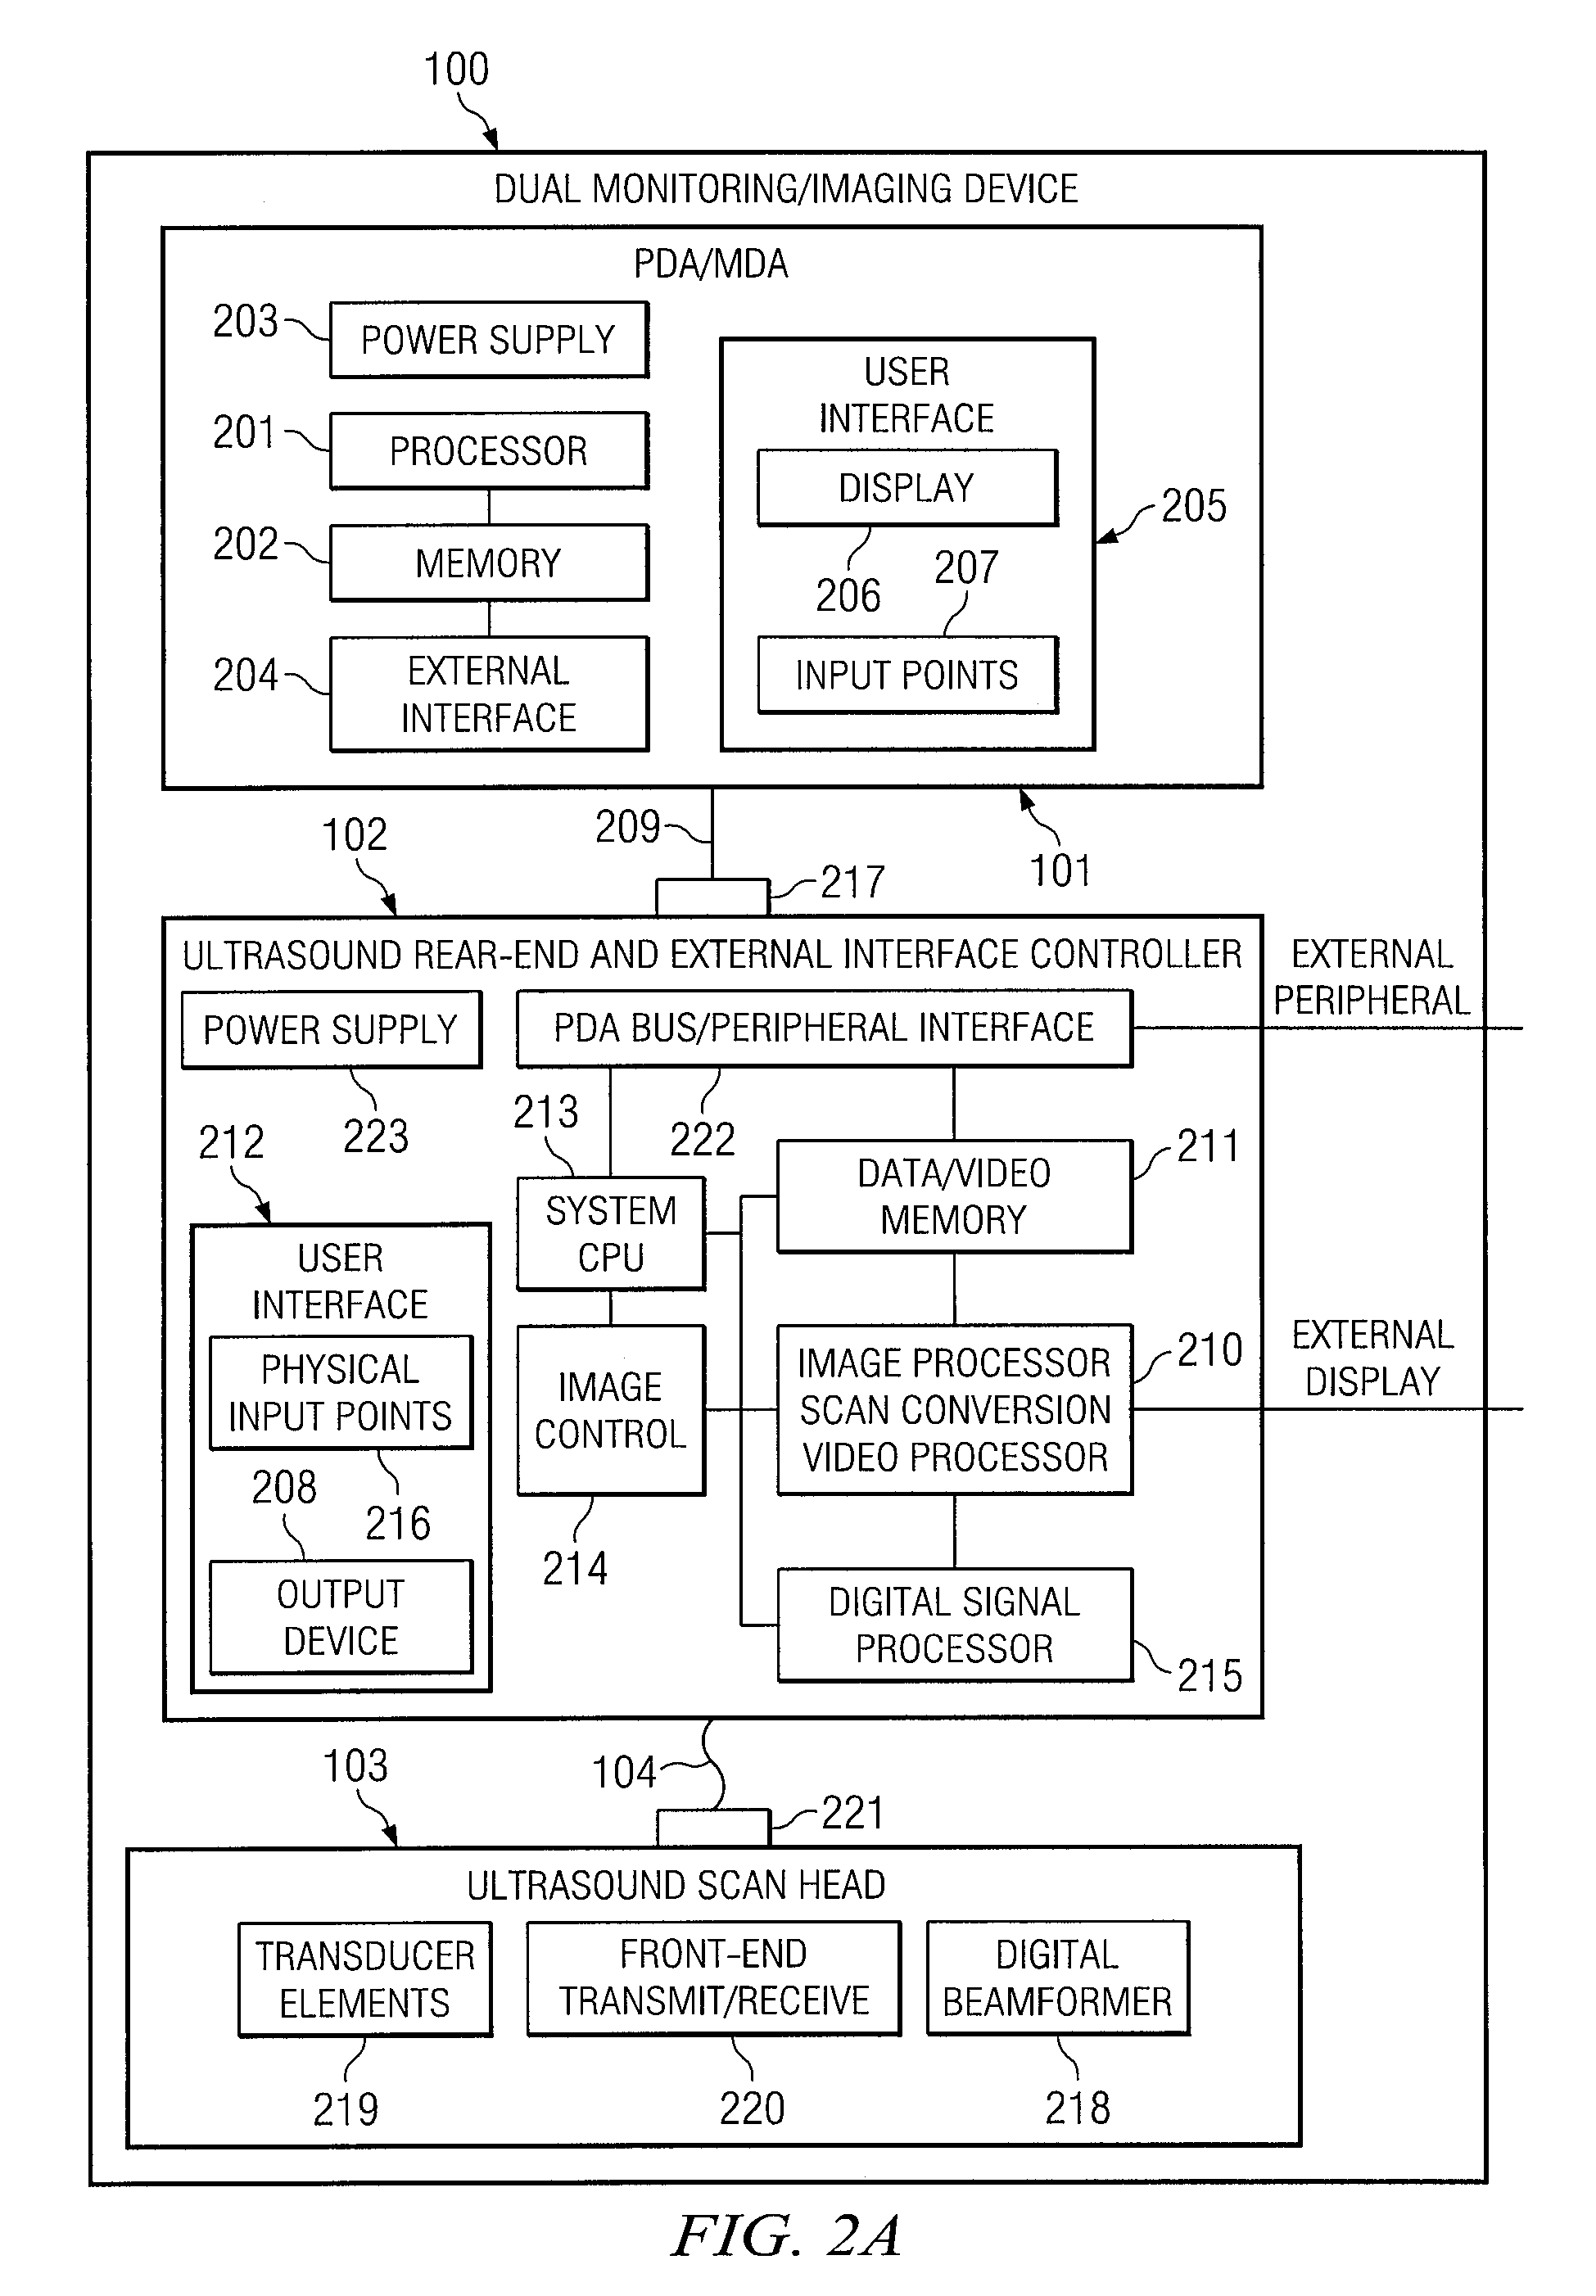 System and method supporting imaging and monitoring applications